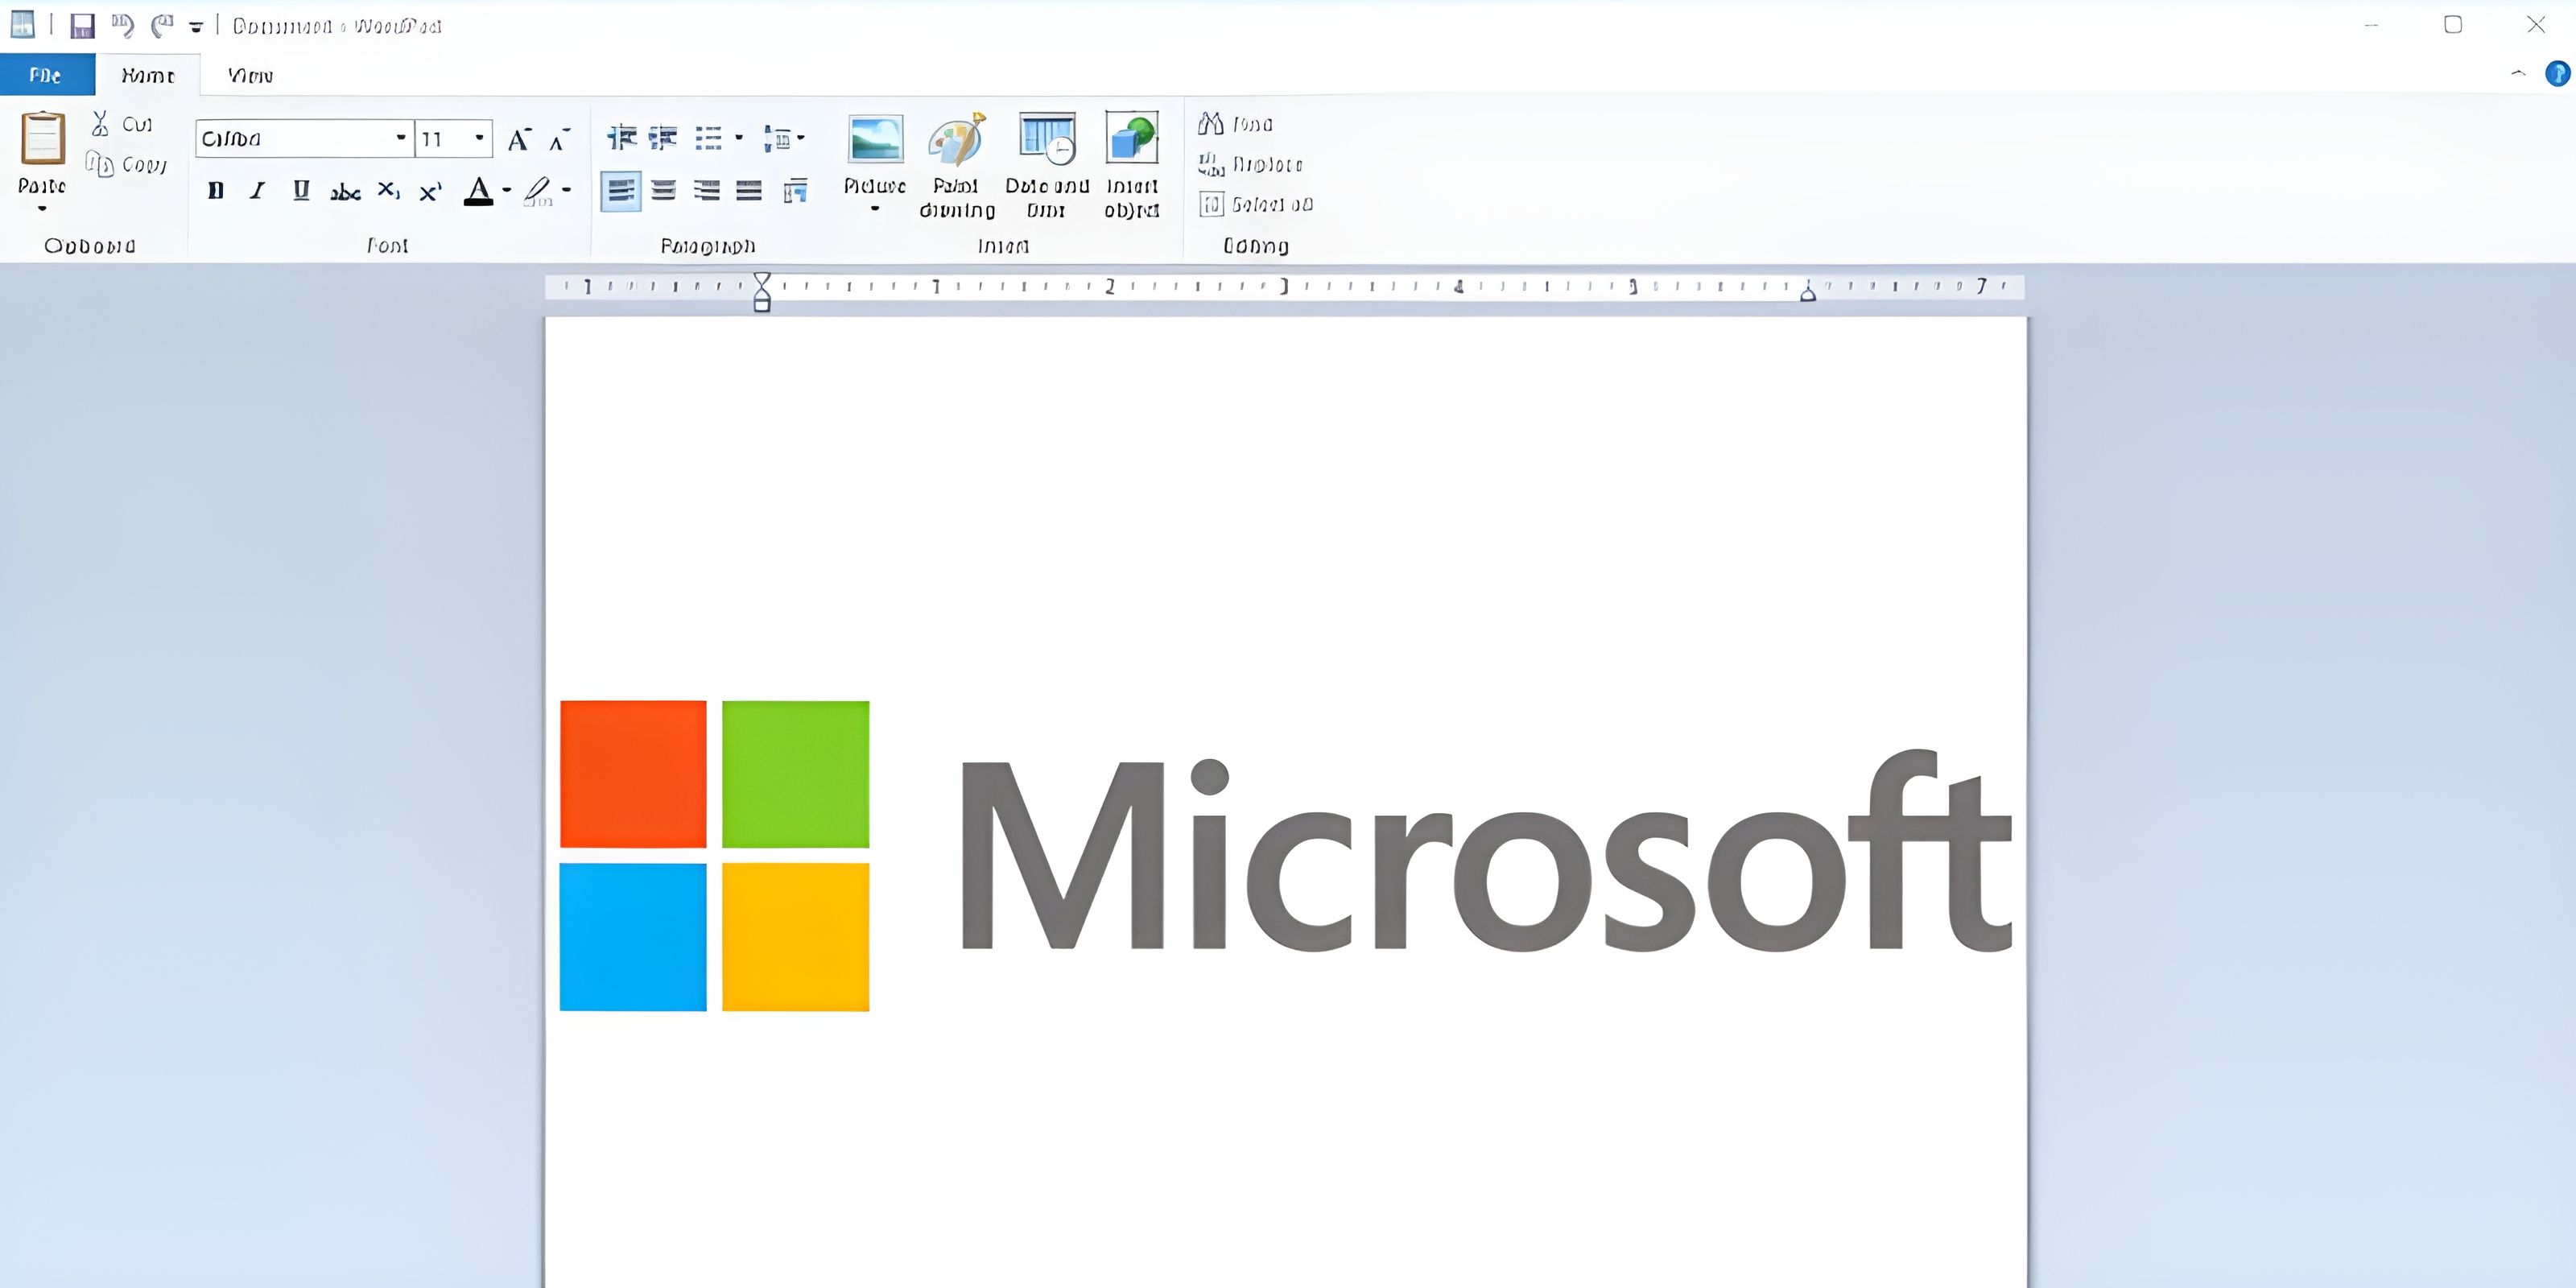 Microsoft to Phase Out WordPad in Upcoming Windows Release